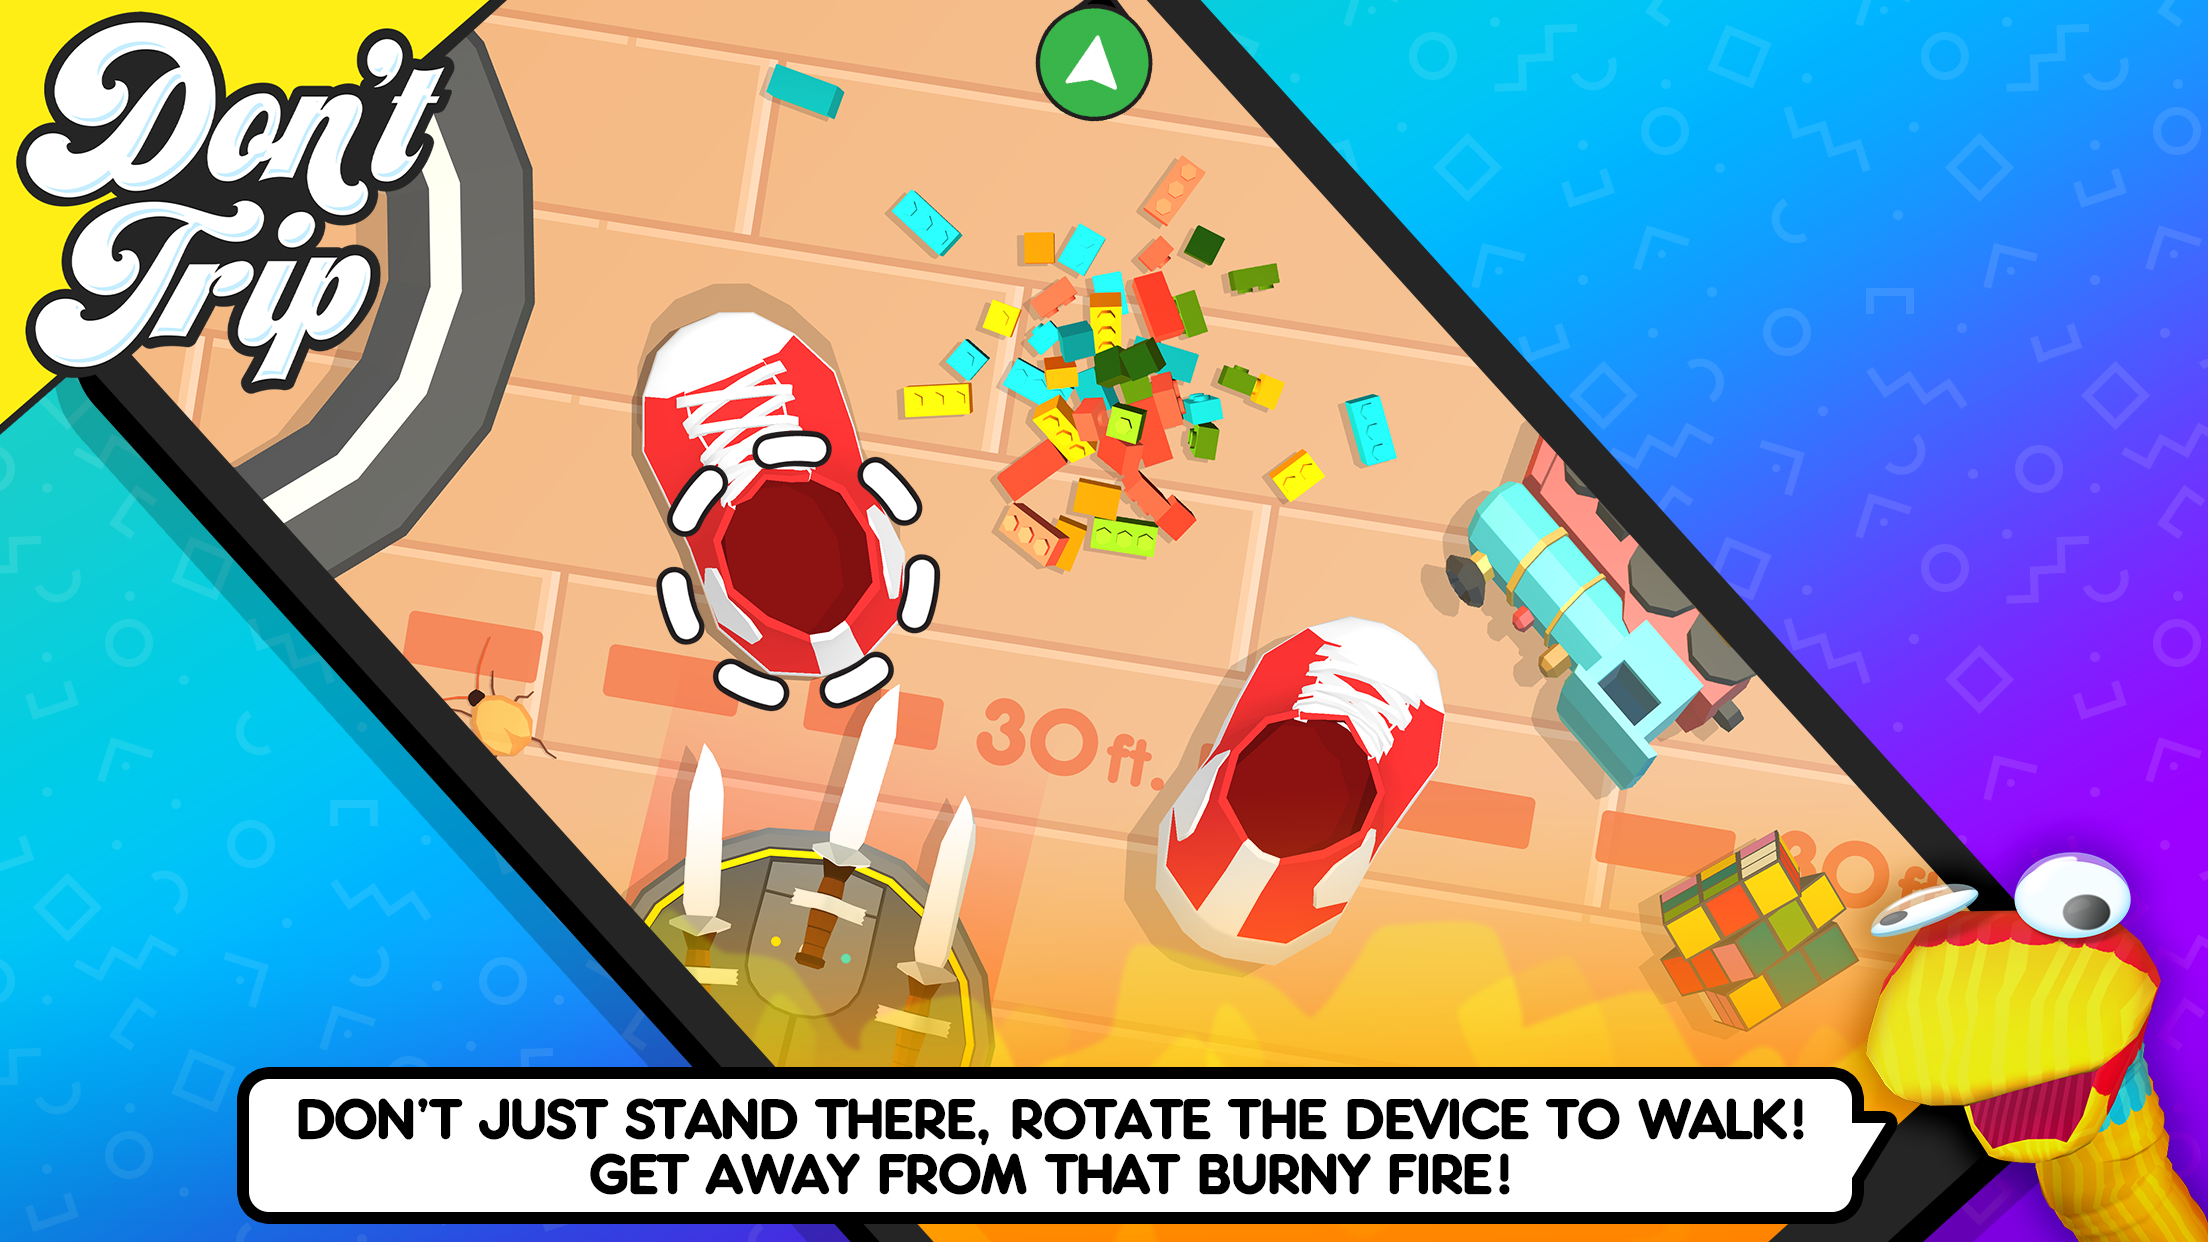 Don't trip игра. Noodlecake игры полёт. Noodlecake Studios games. Dont first Android girl. Dont first